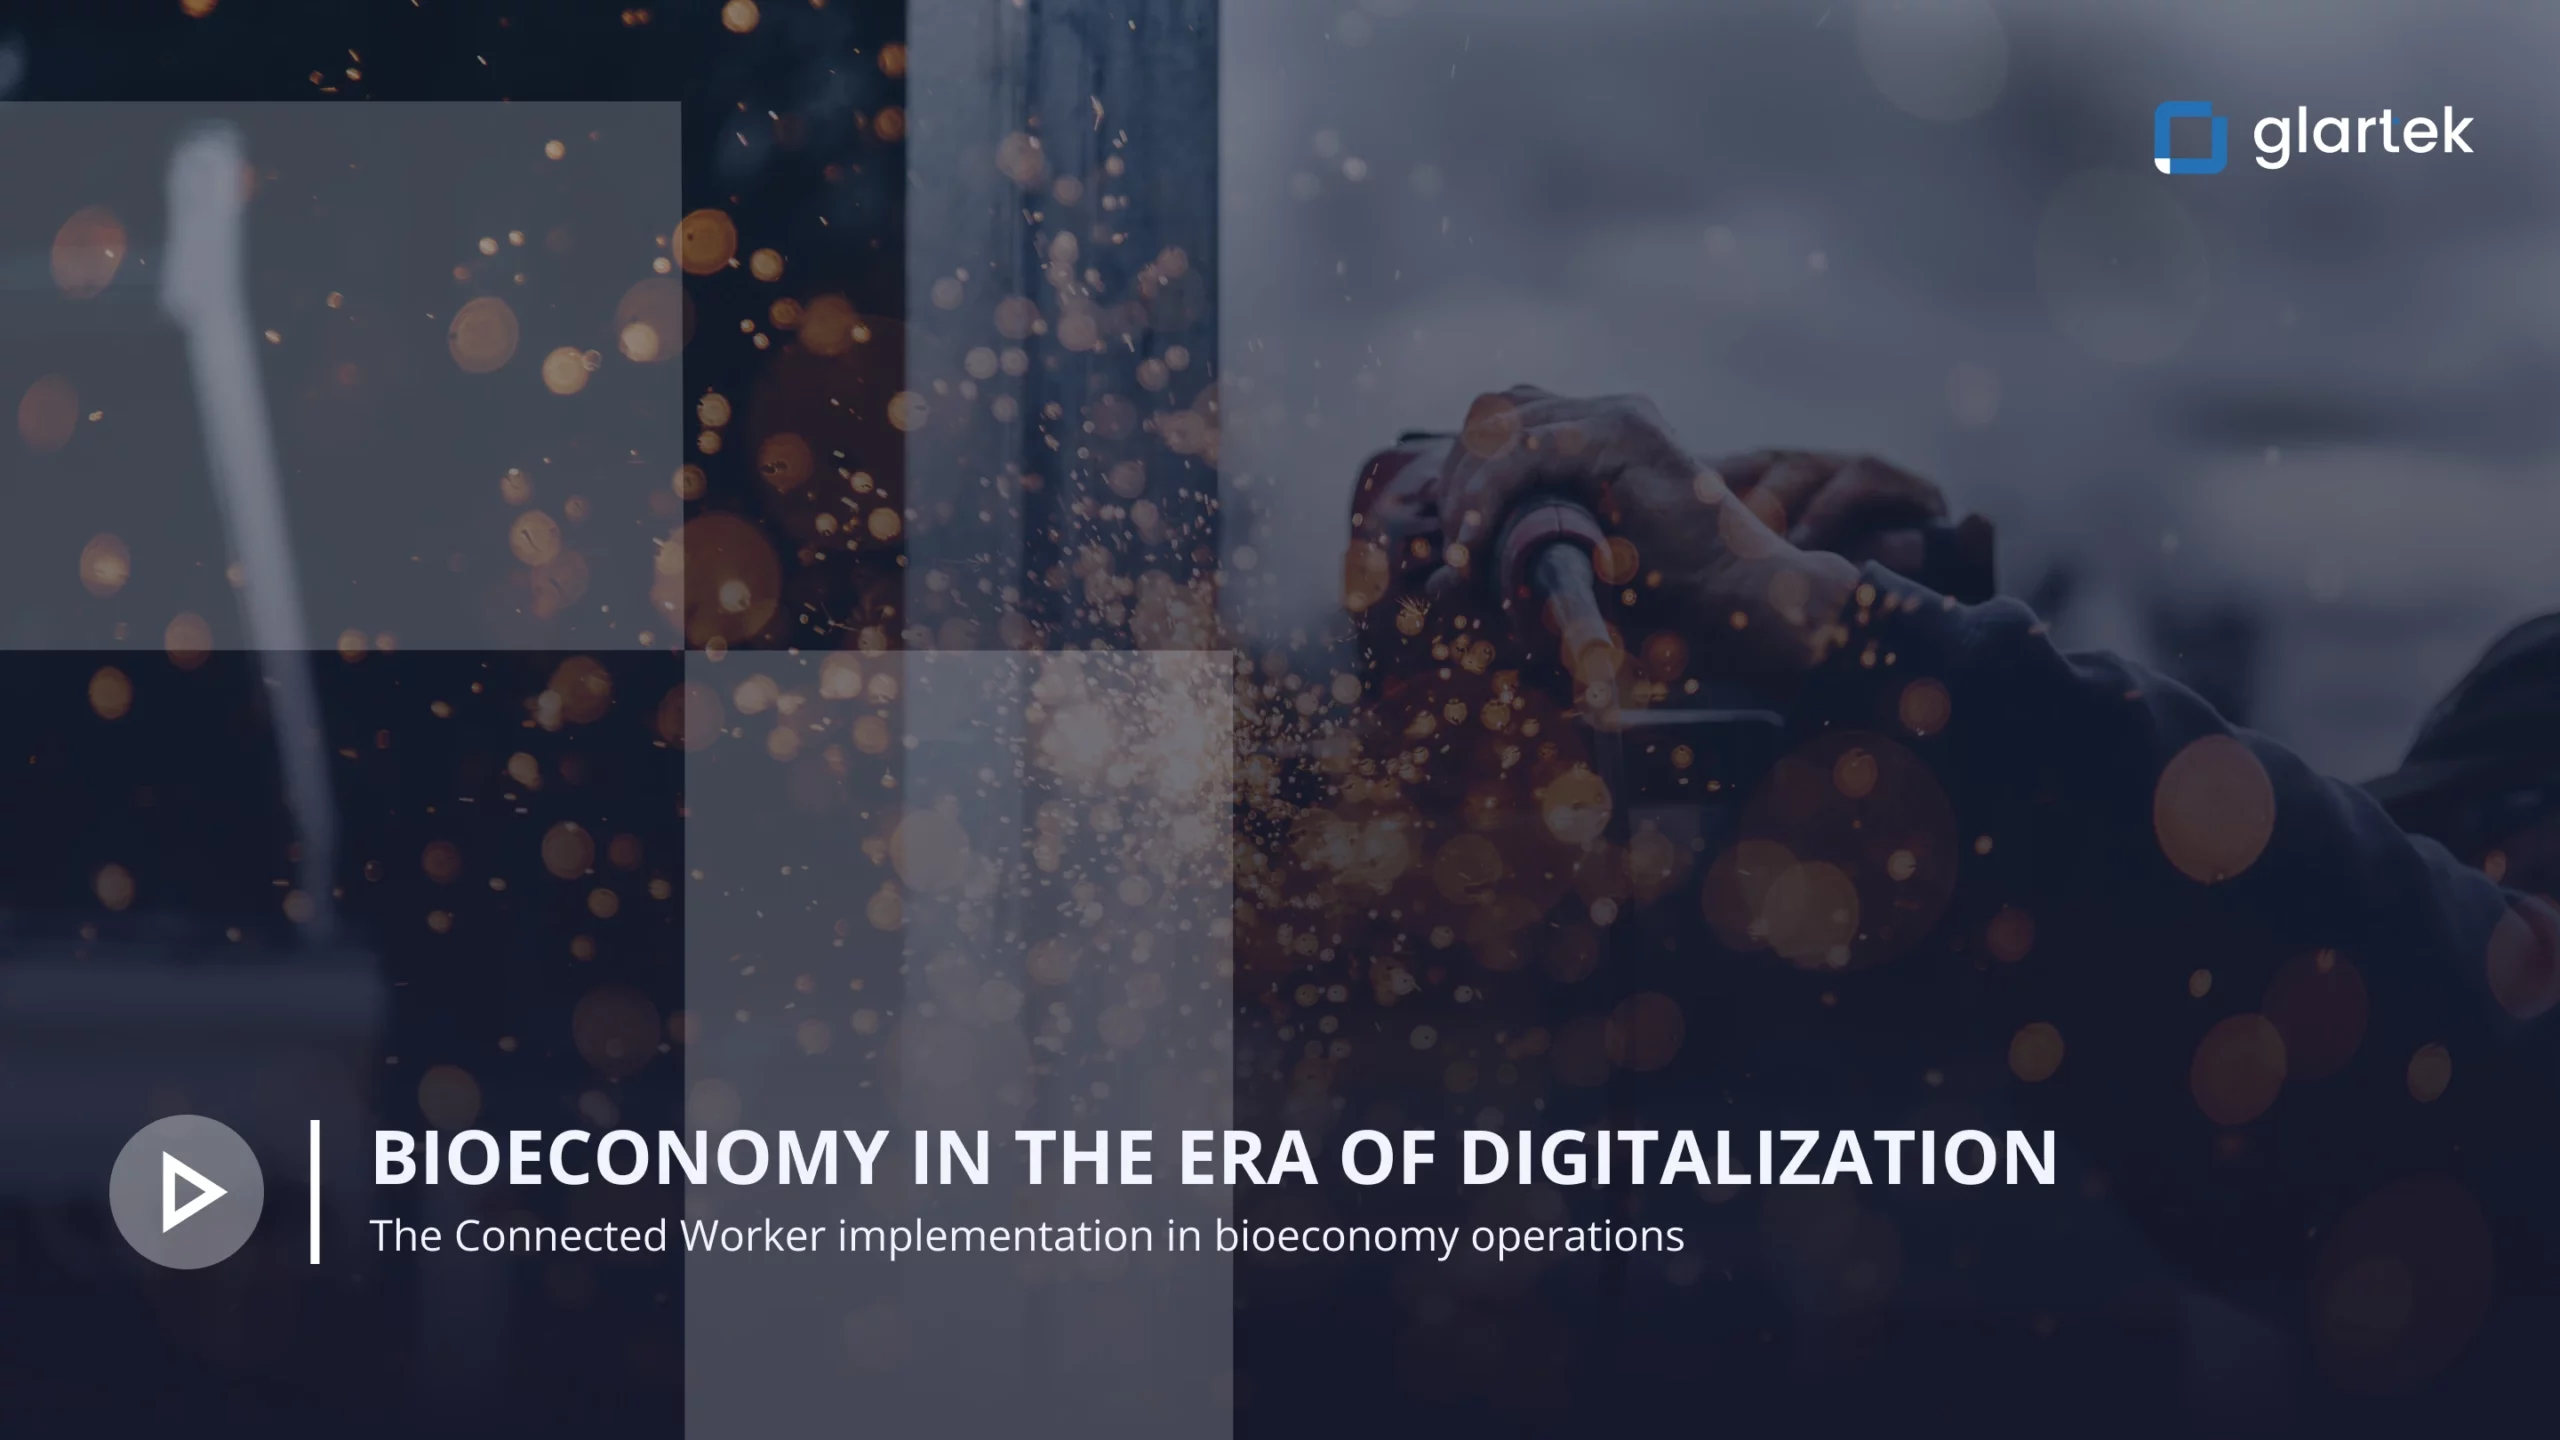 Bioeconomy sector and digitalization Digital transformation of chemical industry